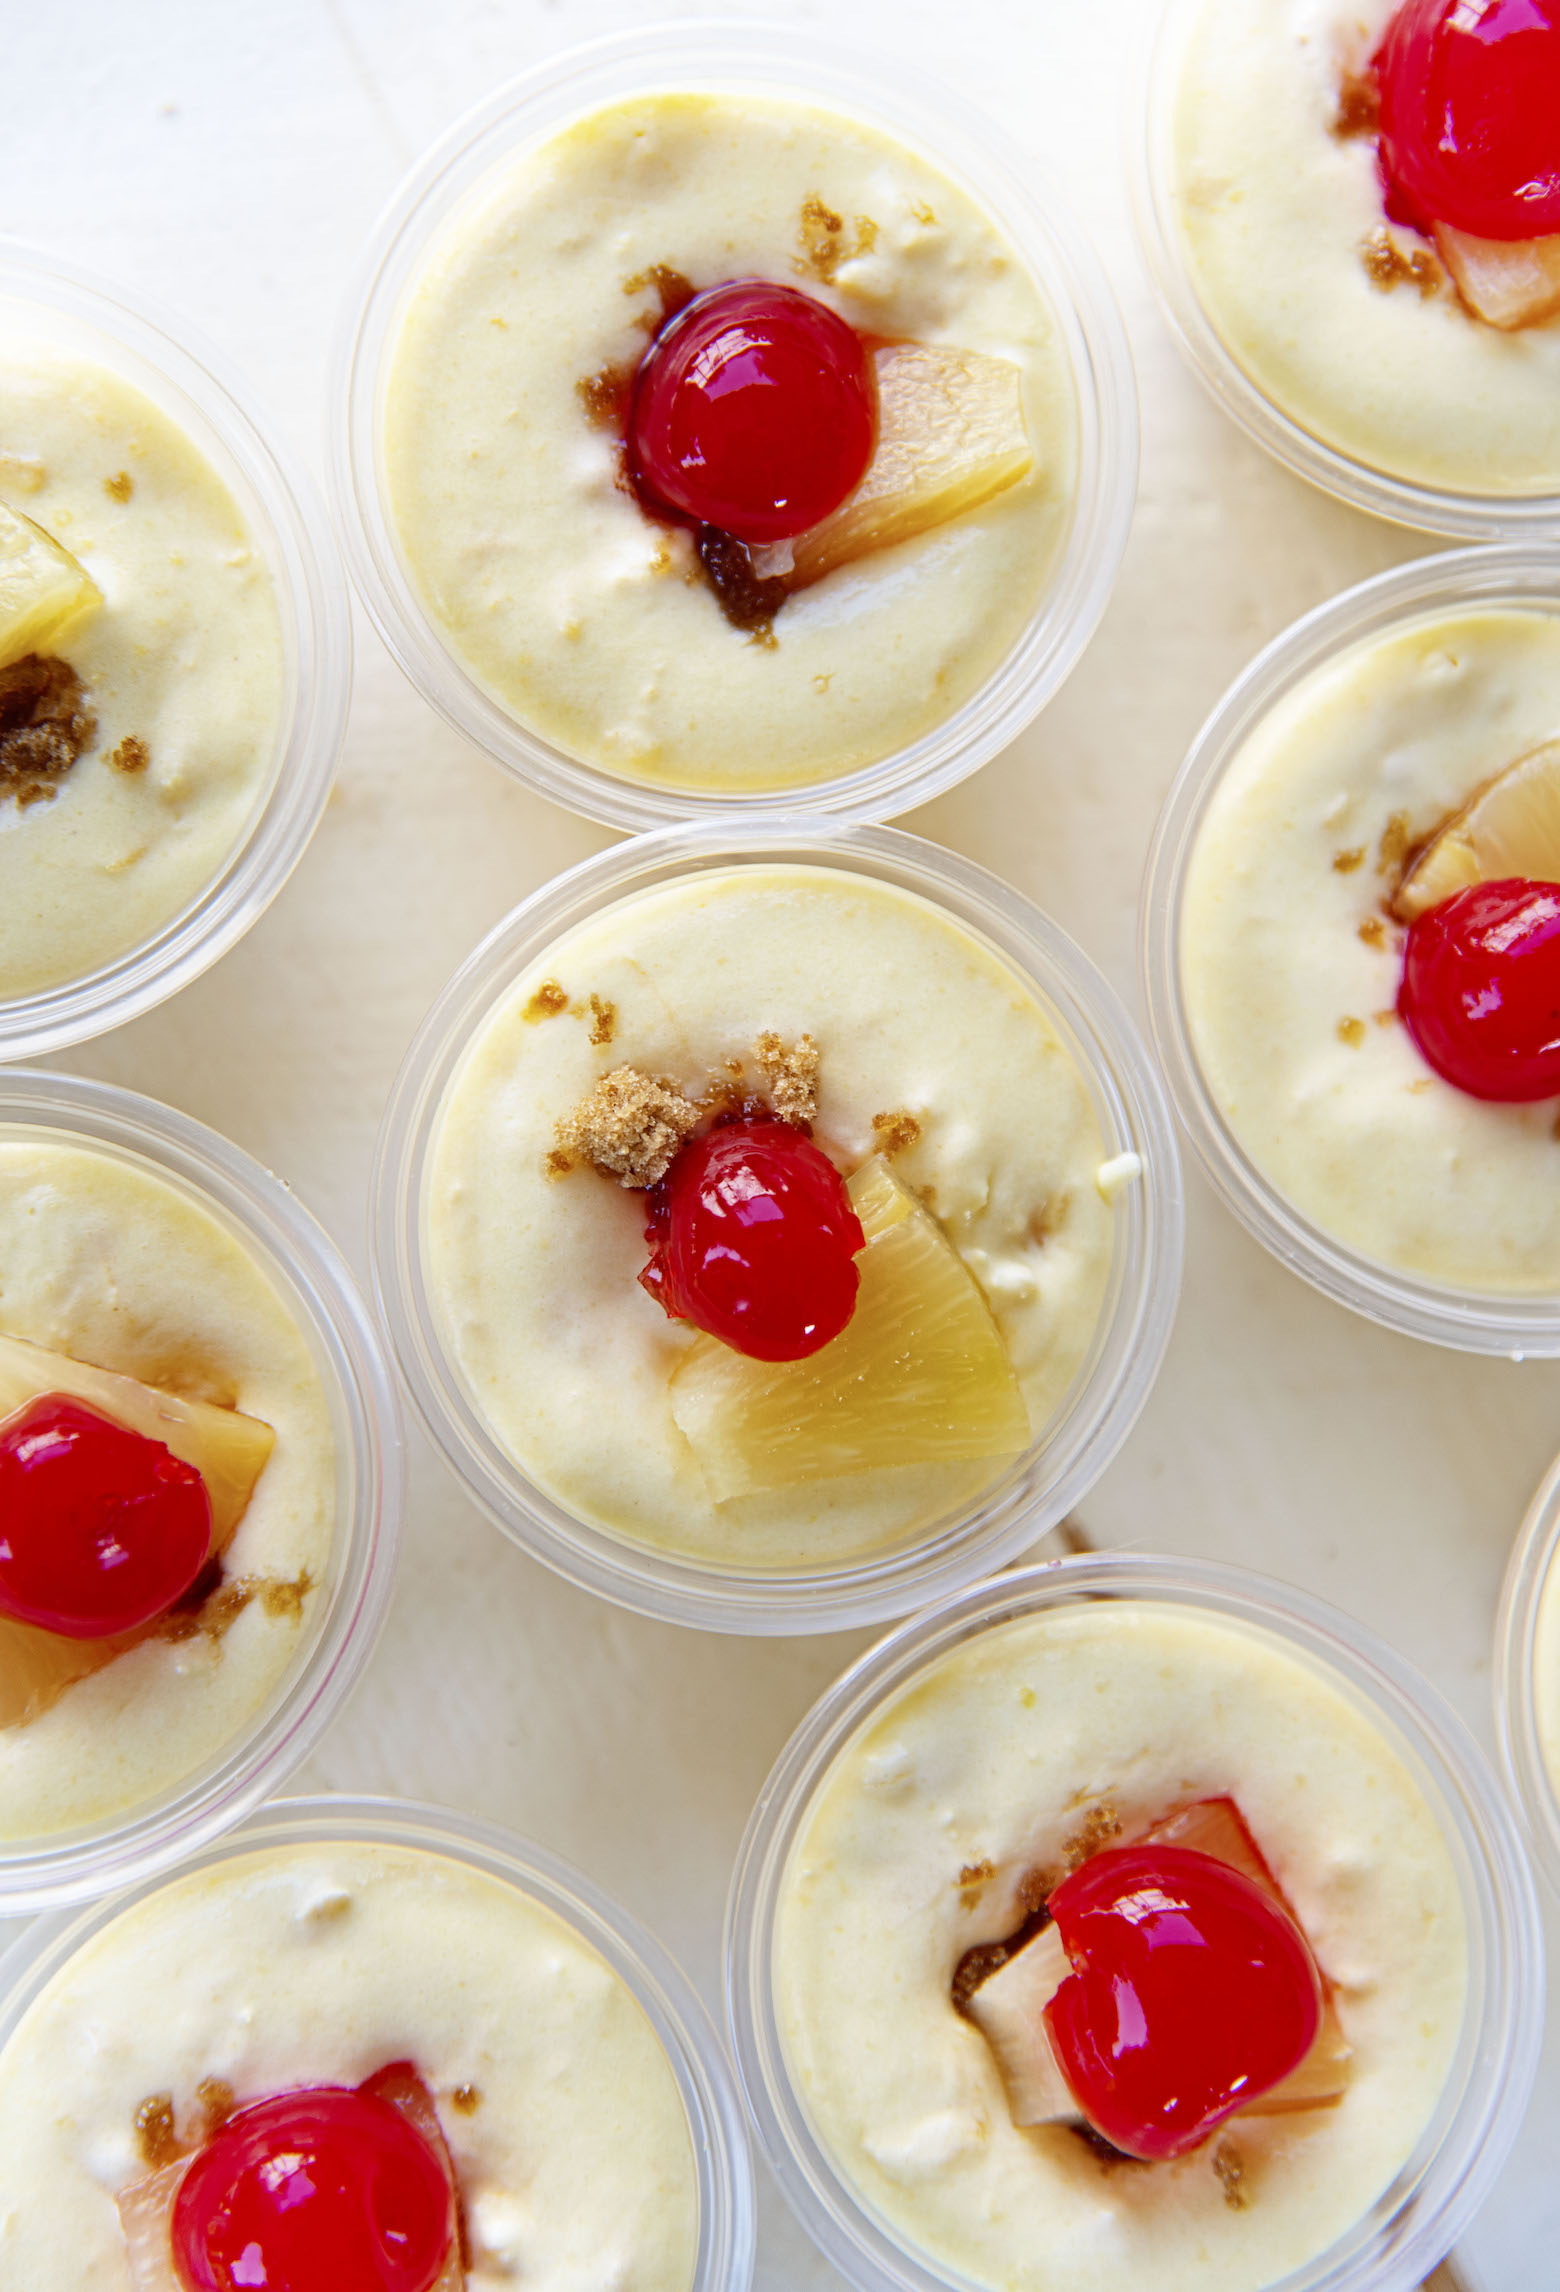 Easy Pudding Shots for a Party - Simple Sips